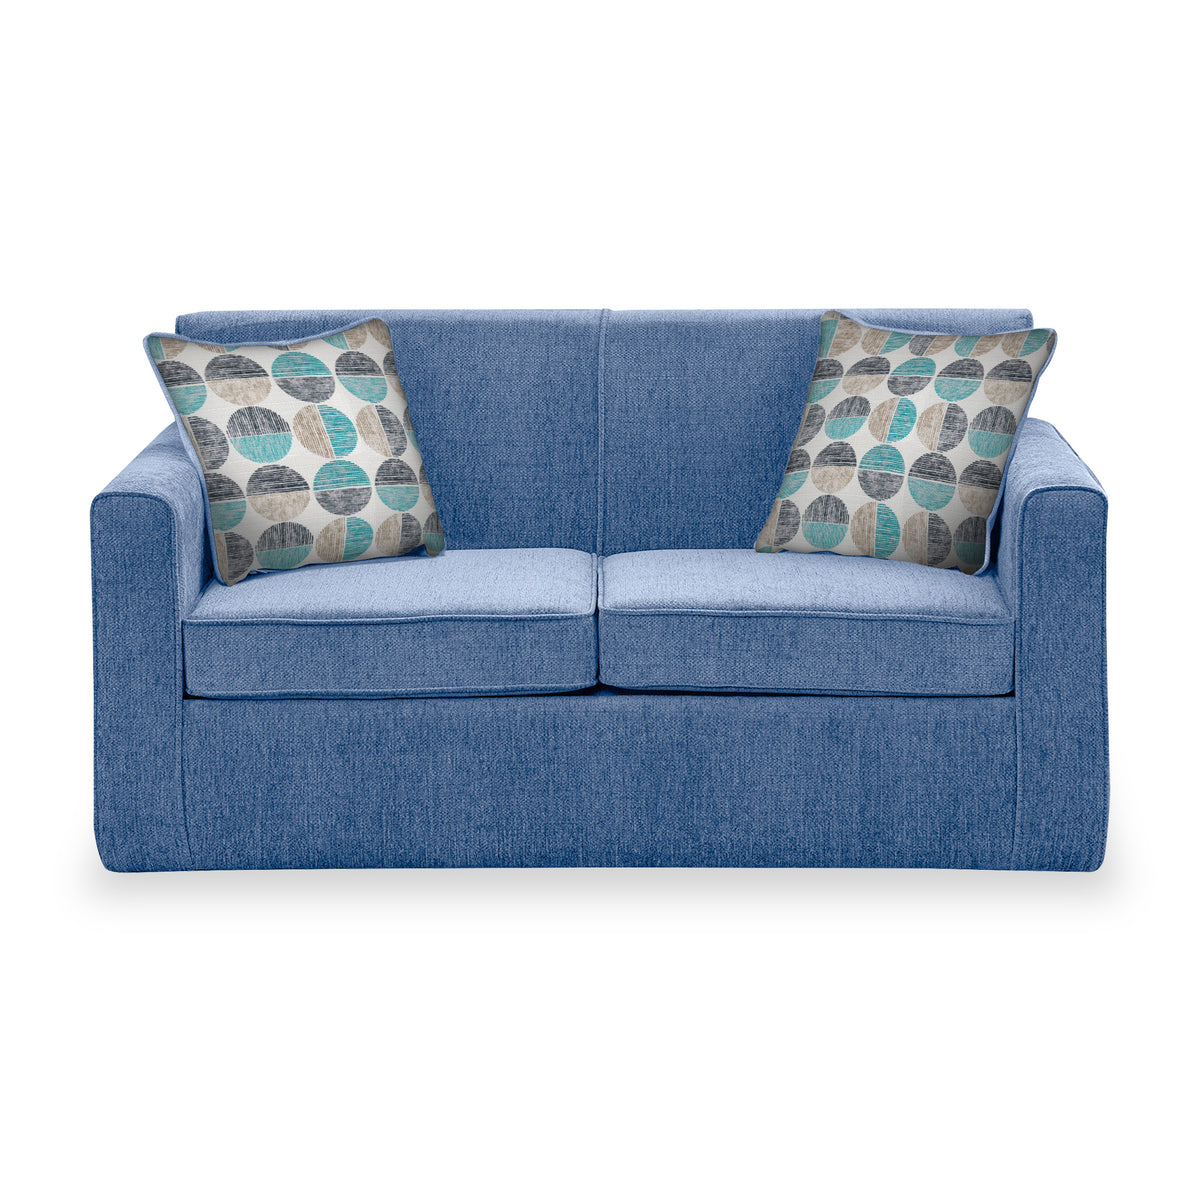 Bawtry Denim Faux Linen 2 Seater Sofabed with Duck Egg Scatter Cushions from Roseland Furniture